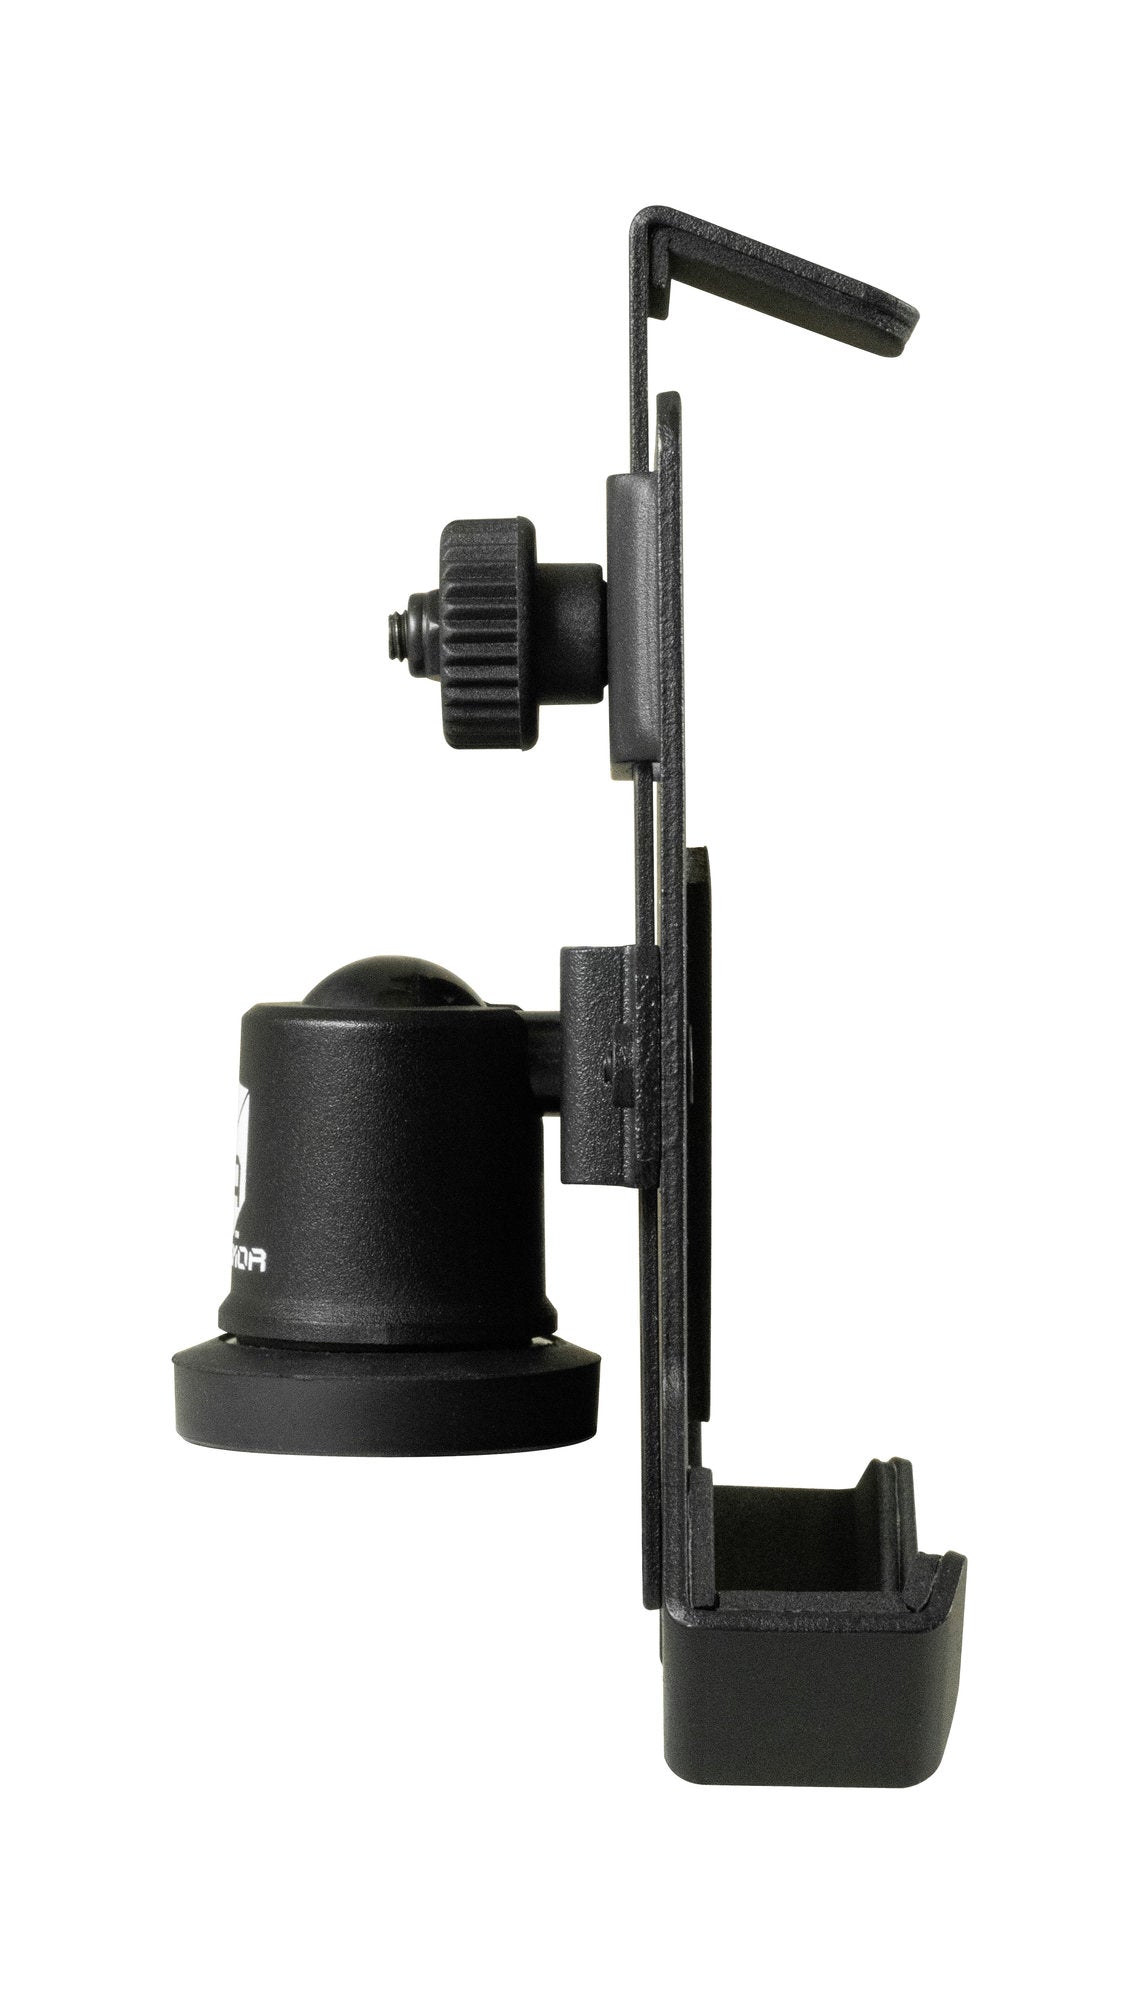 Mob Armor Magnetic Phone Mount (Mob Mount Magnetic)